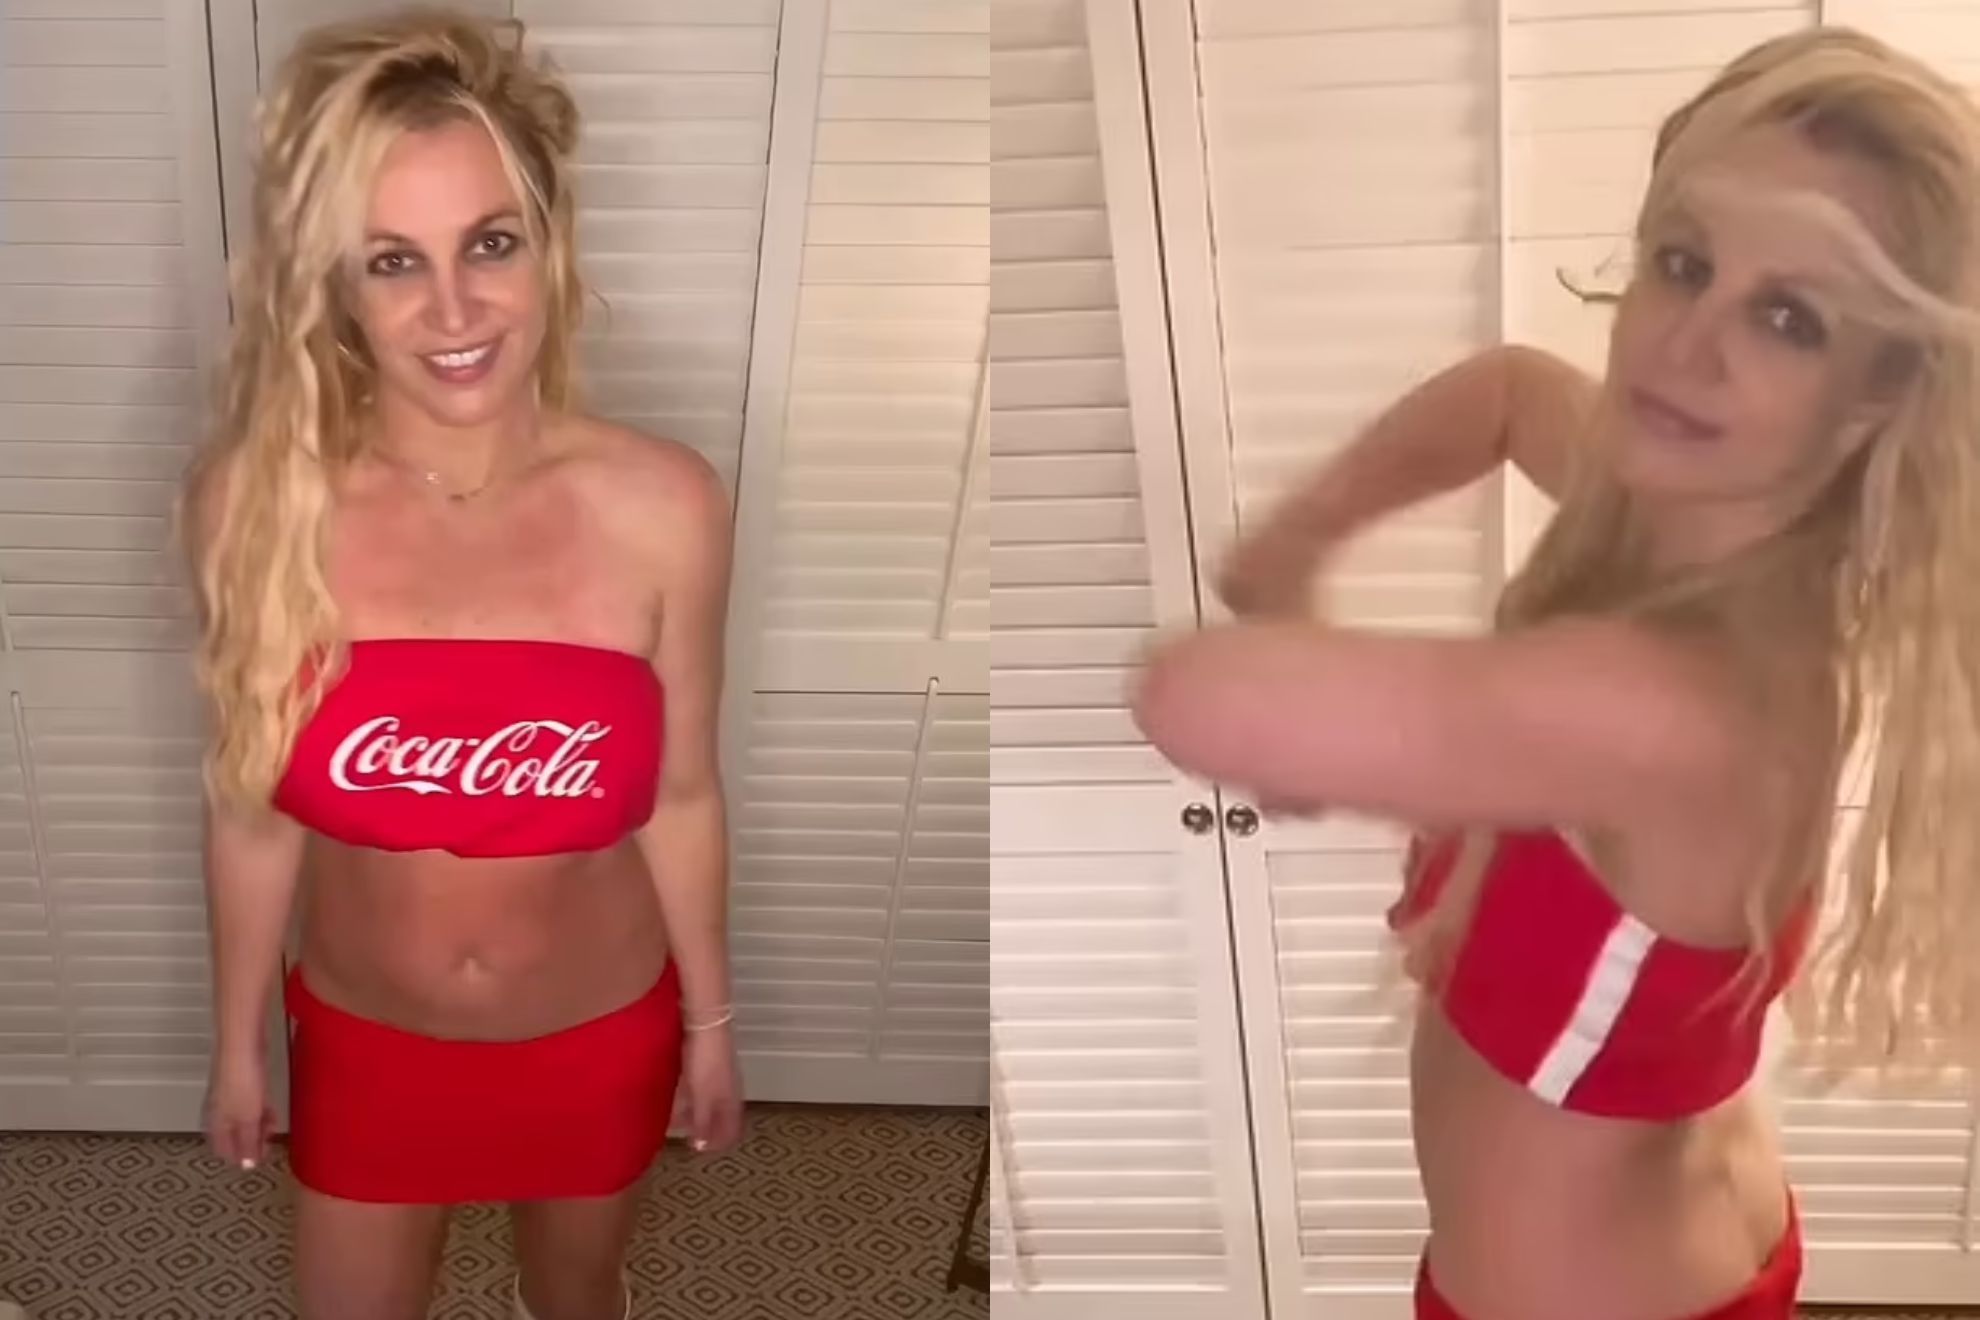 Britney Spears decides to change her name